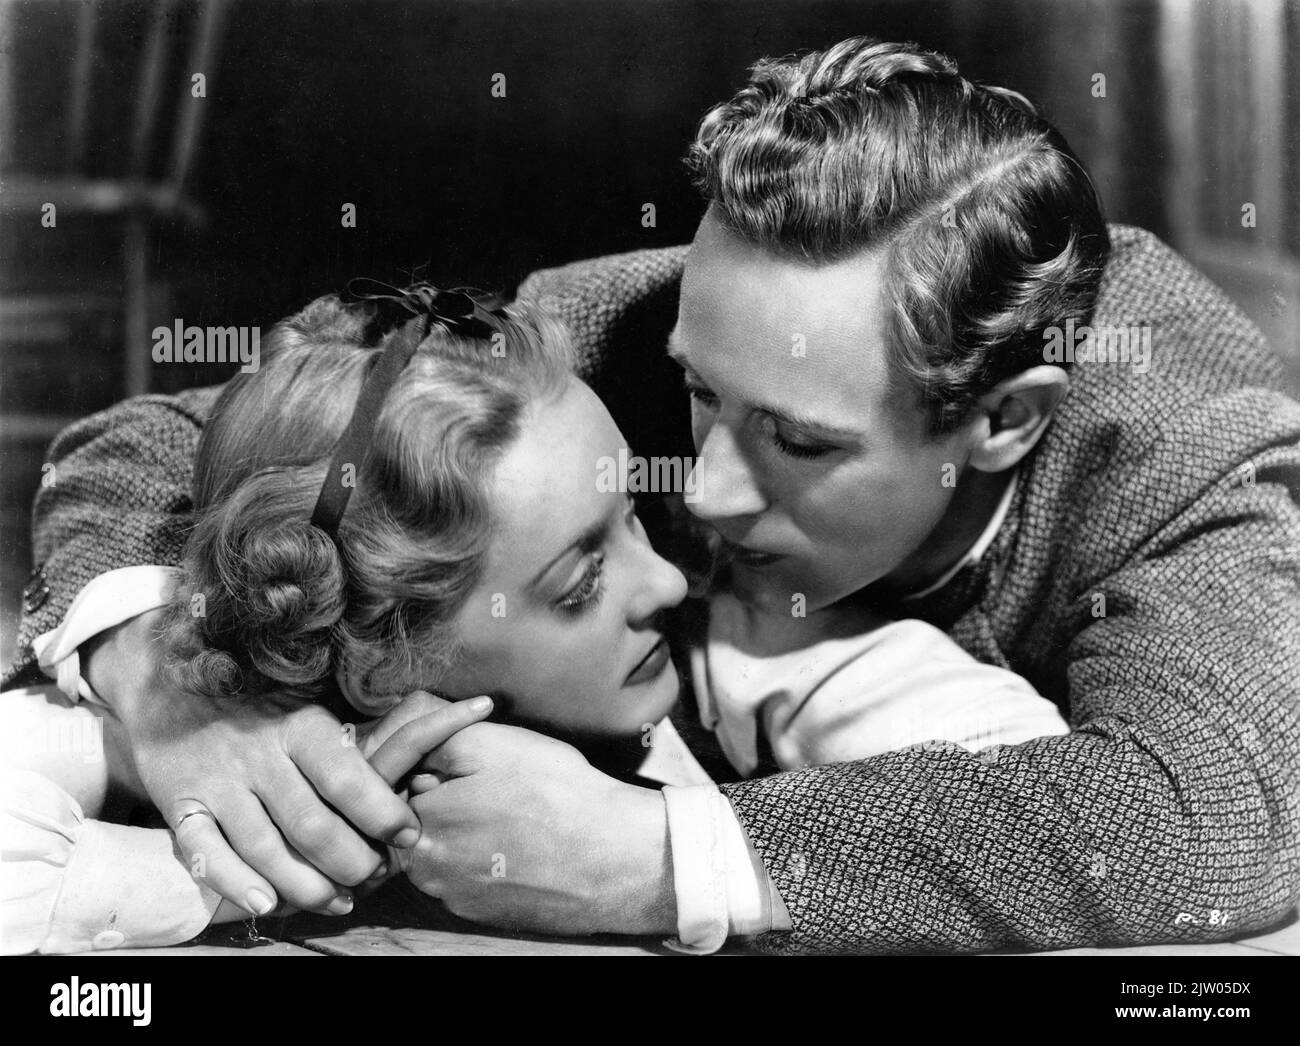 BETTE DAVIS and LESLIE HOWARD in THE PETRIFIED FOREST 1936 director ARCHIE MAYO play Robert E. Sherwood screenplay Charles Kenyon and Delmer Daves Warner Bros. Stock Photo